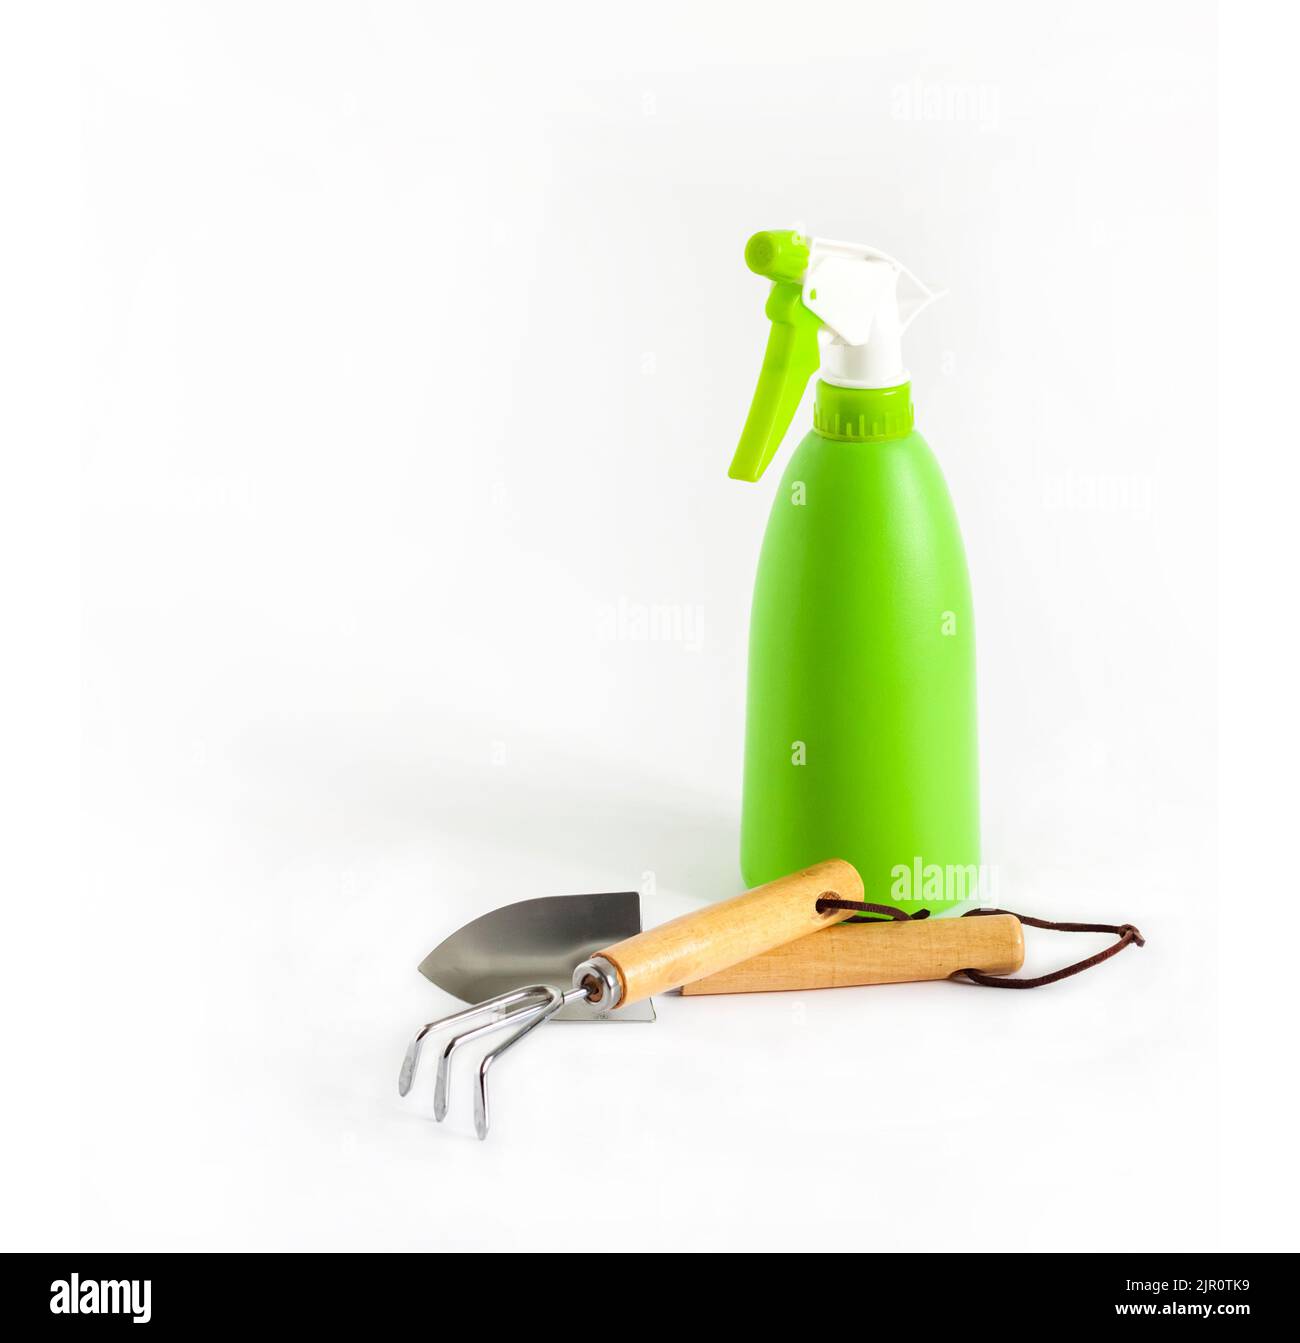 Green spray bottle and garden tools on white background. Plant care concept Stock Photo